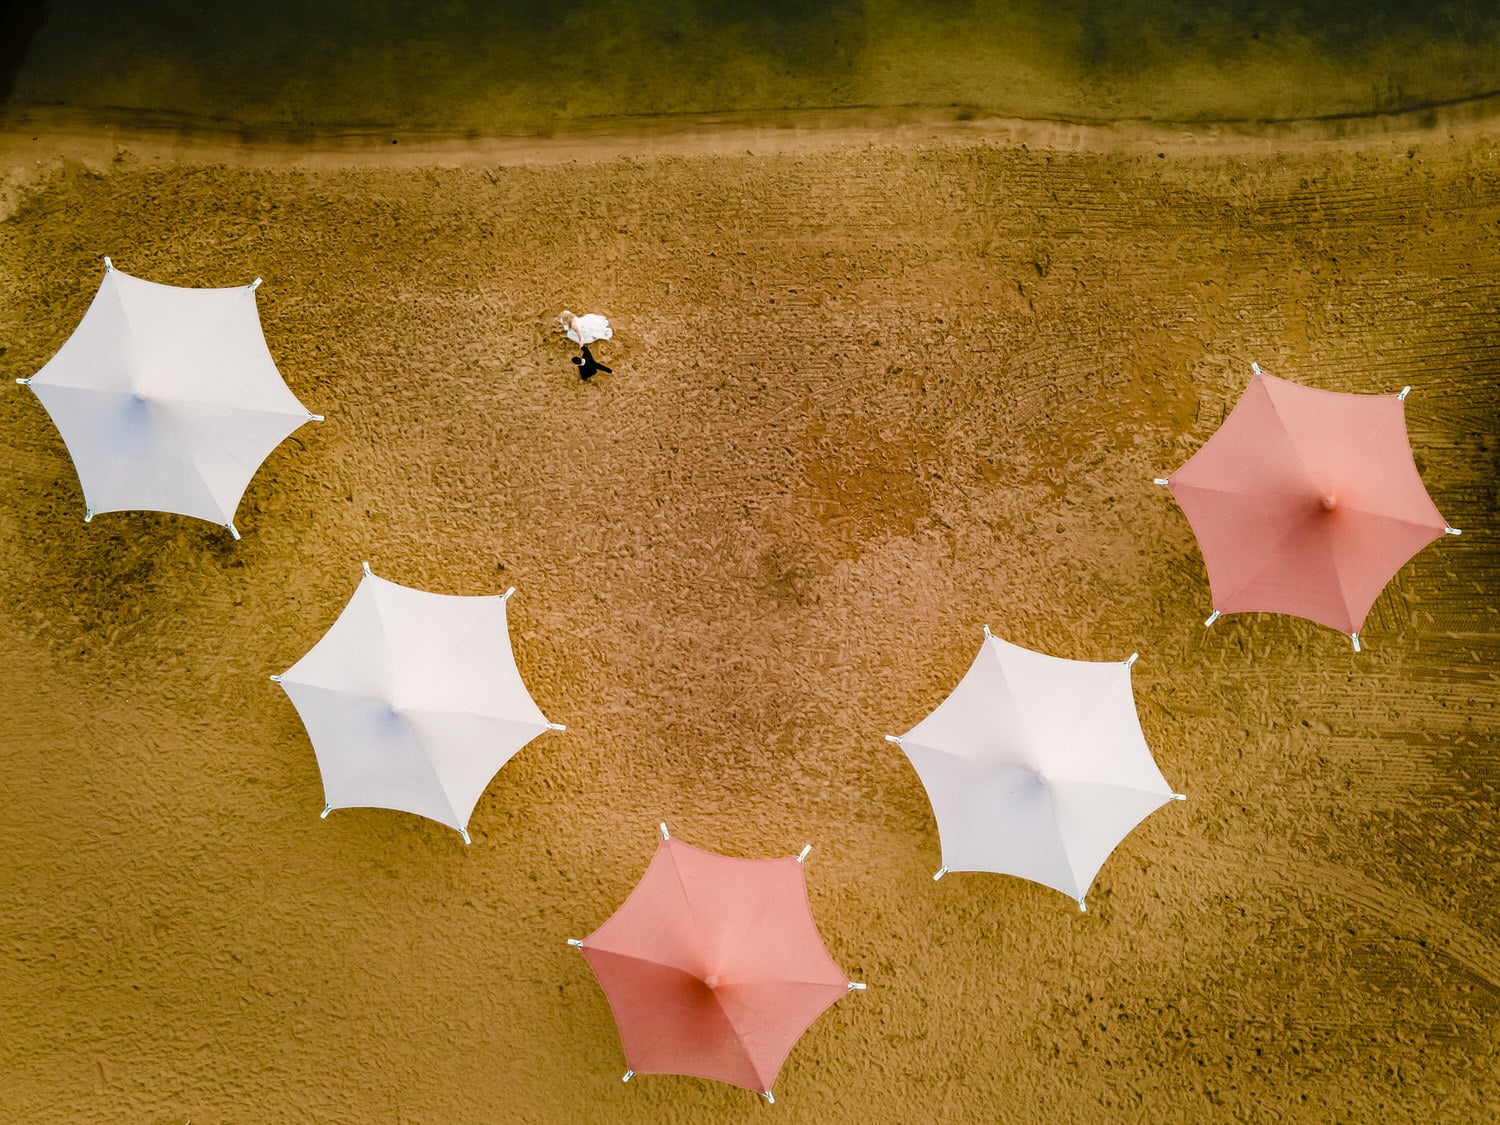 A picture taken by a drone of a bride and groom walking across a beach holding hands, colorful beach umbrellas surrounding them. 